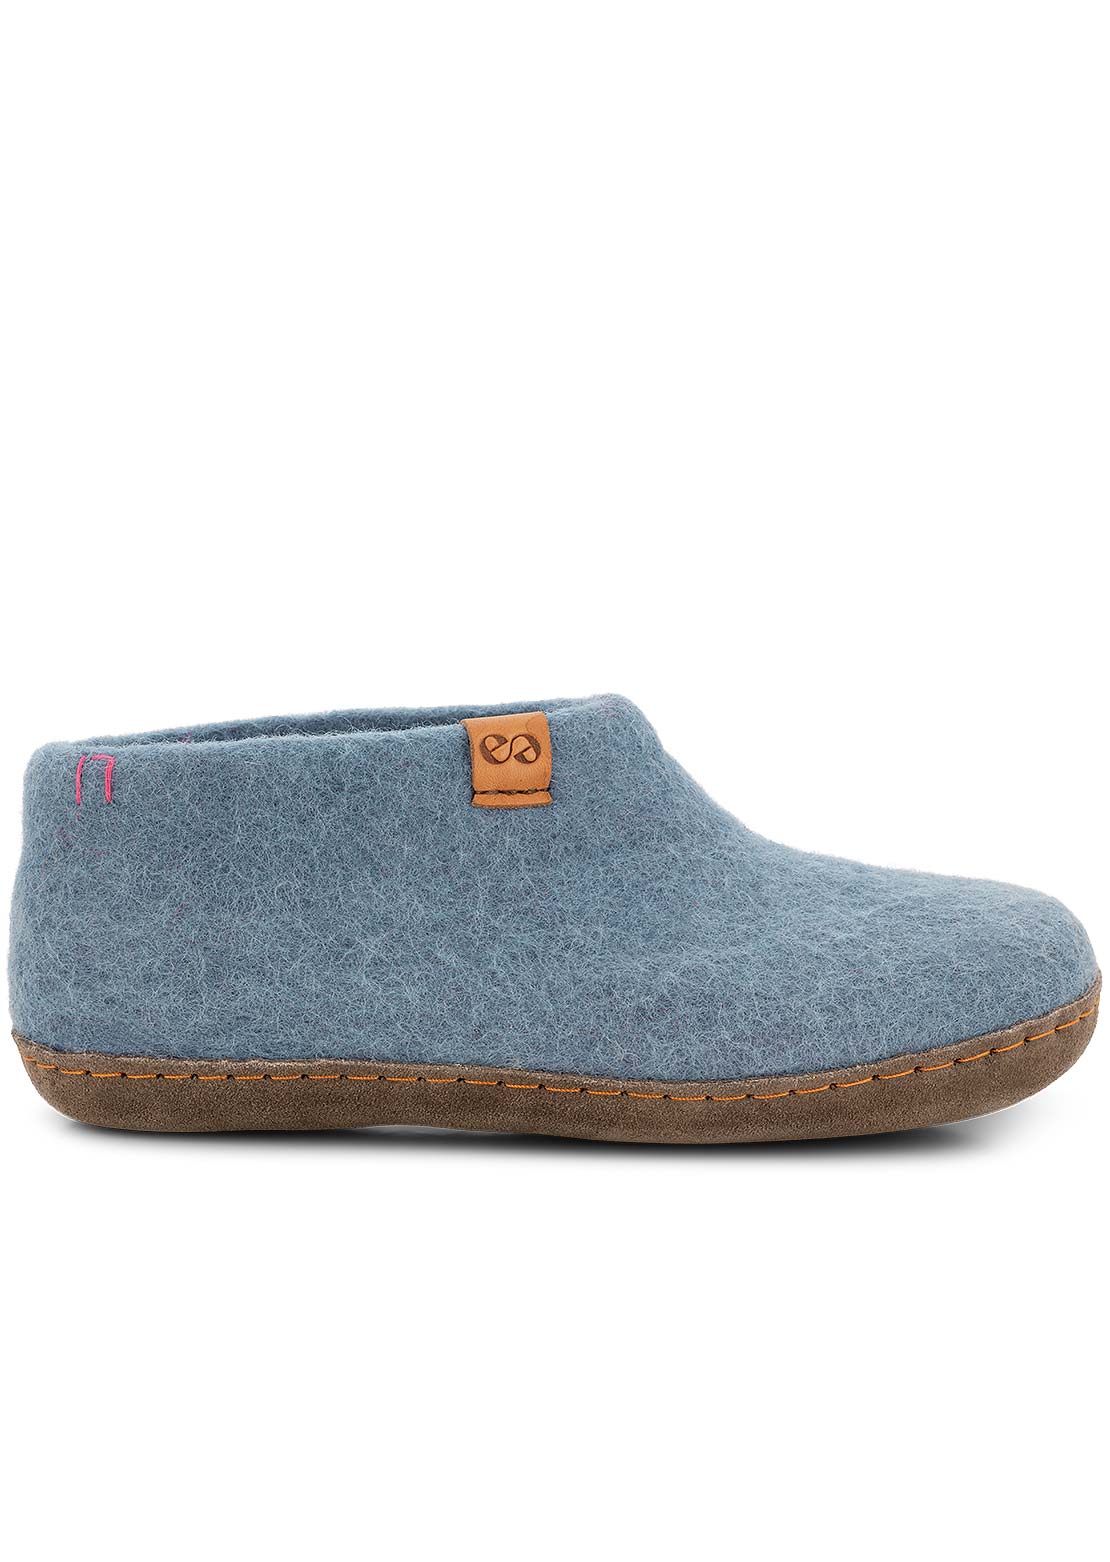 Wool by Green Unisex Mera Suede Sole Shoes Light Blue